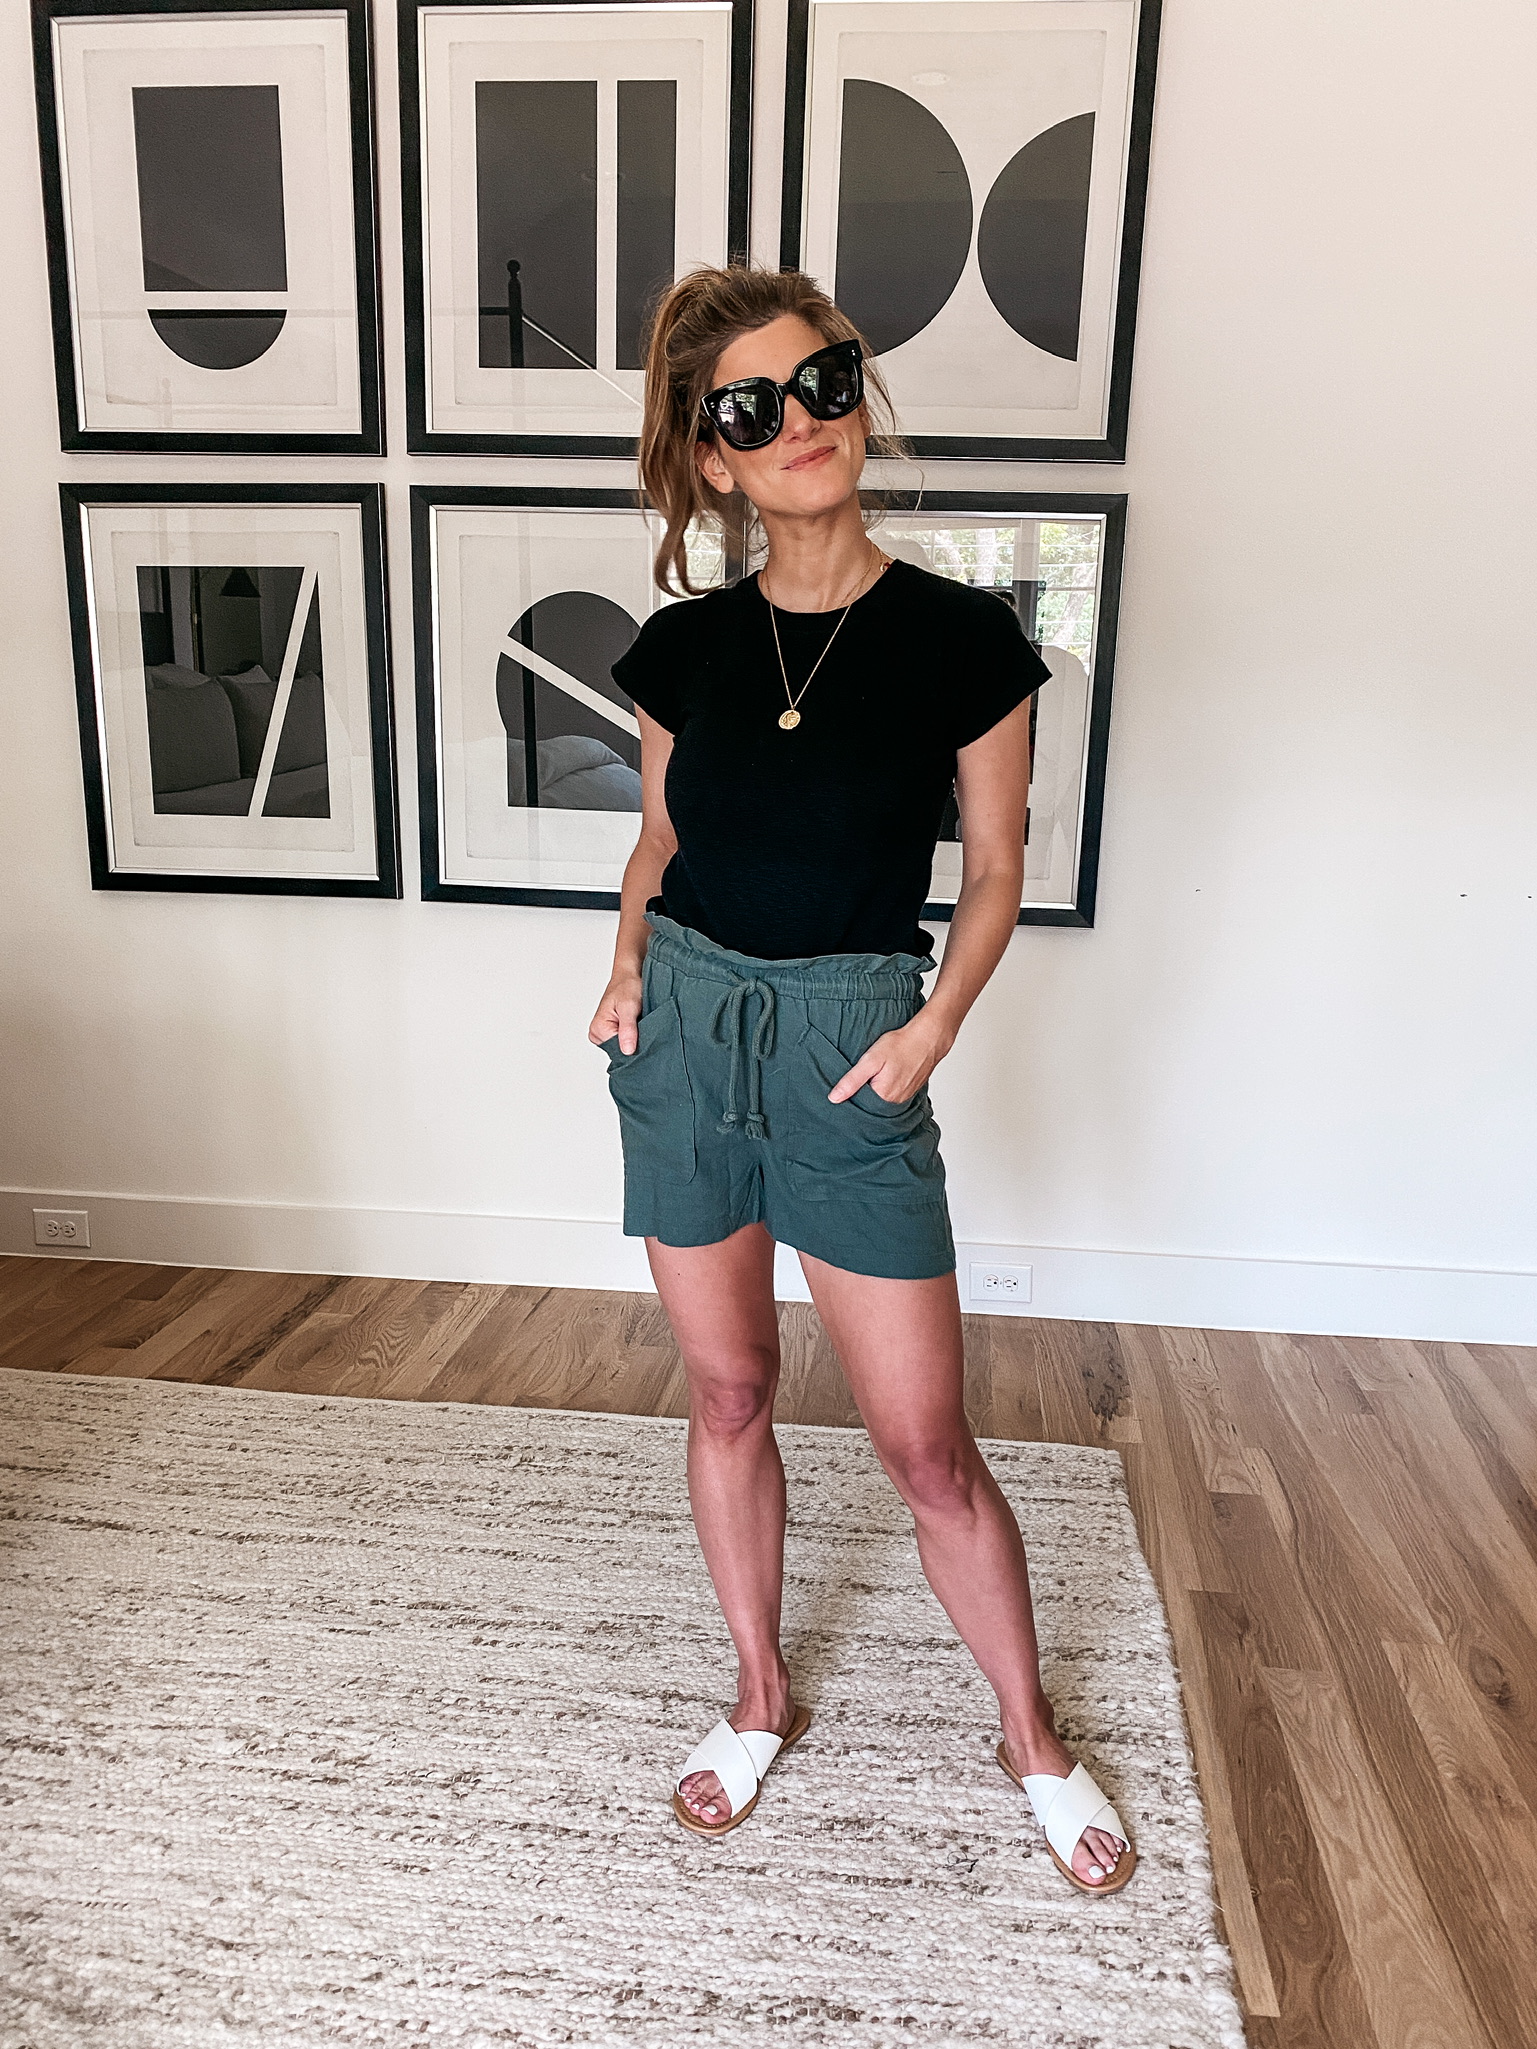 Brighton Butler wearing green shorts and black tee from madewell